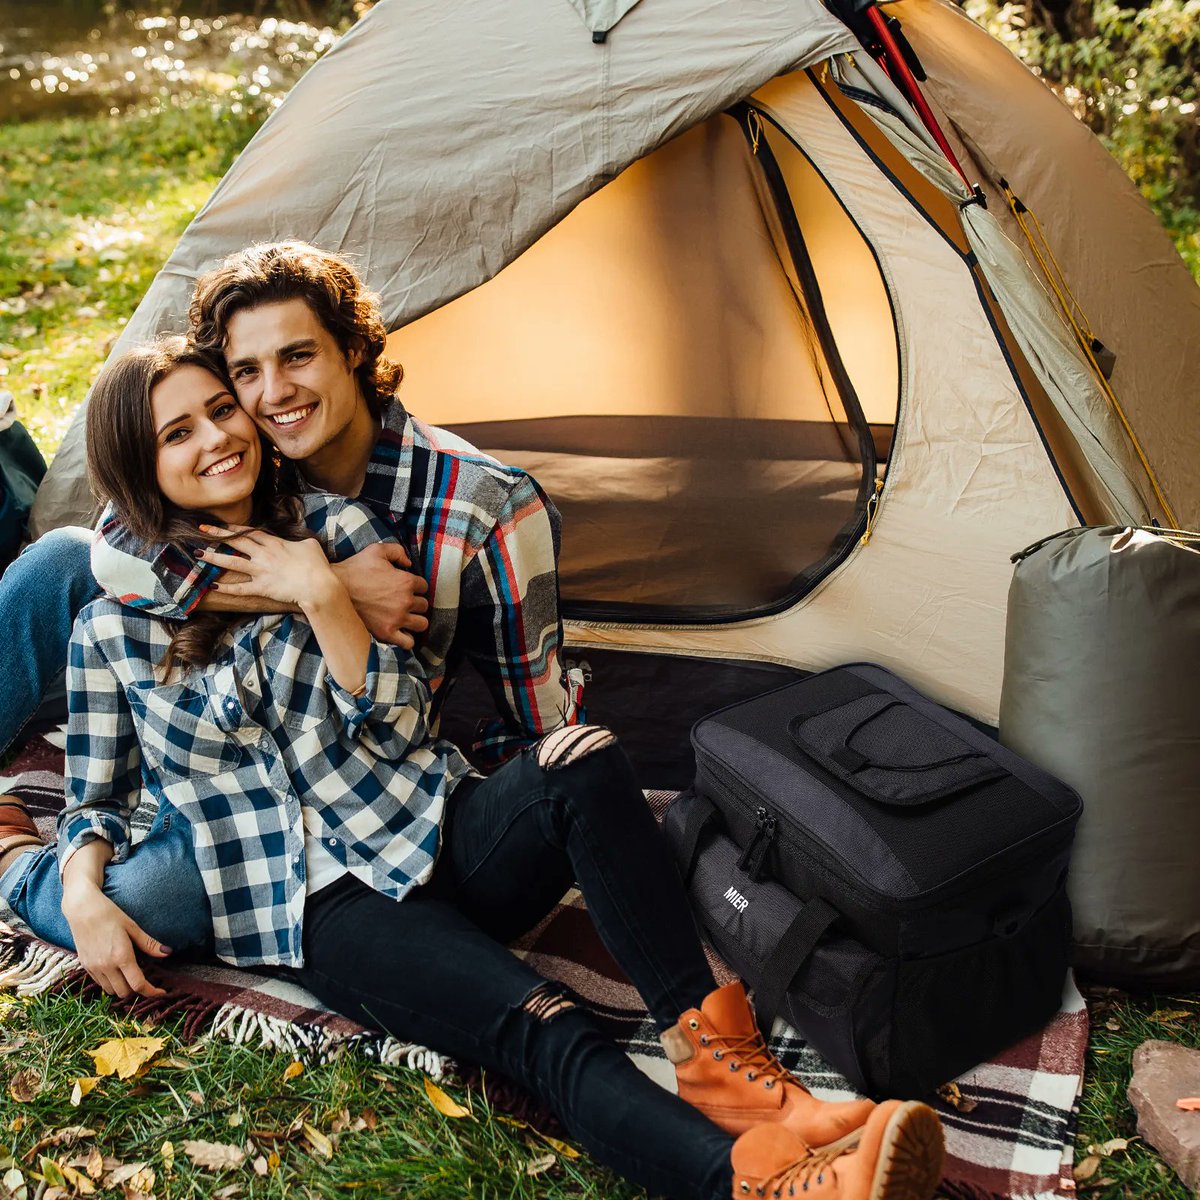 Spend more time with those who make you smile and less time with those who you feel pressured to impress.

Enjoy camping with your beloved and MIER TENT~

(GO MIER WEBSITE FOR MORE CAMPING TENTS!) 

#camping #camp #camplife #campingtent #campingtents #tent  #tentcamping #outings